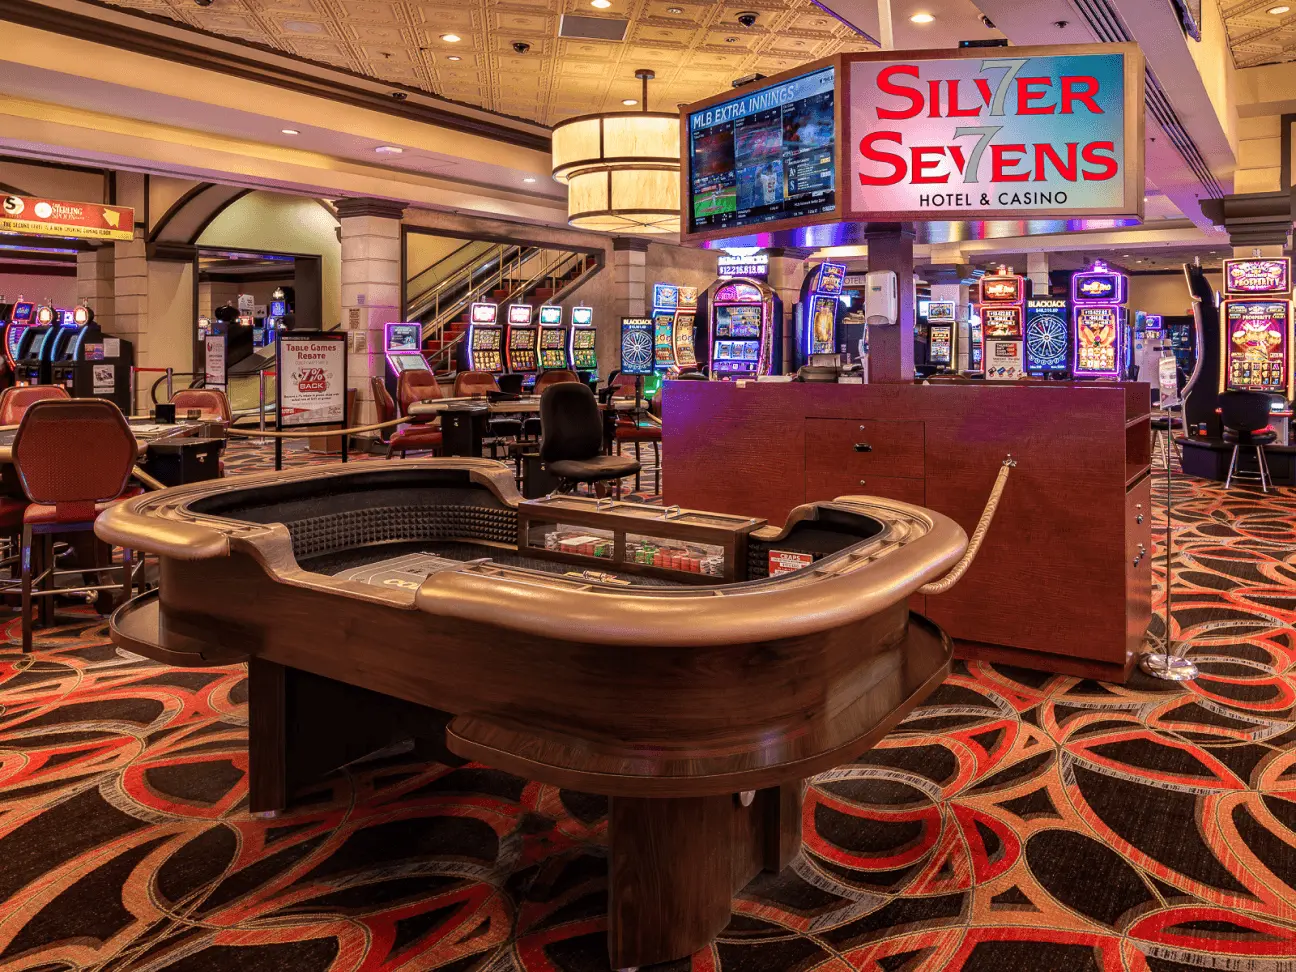 Table Games View - Silver Sevens Casino